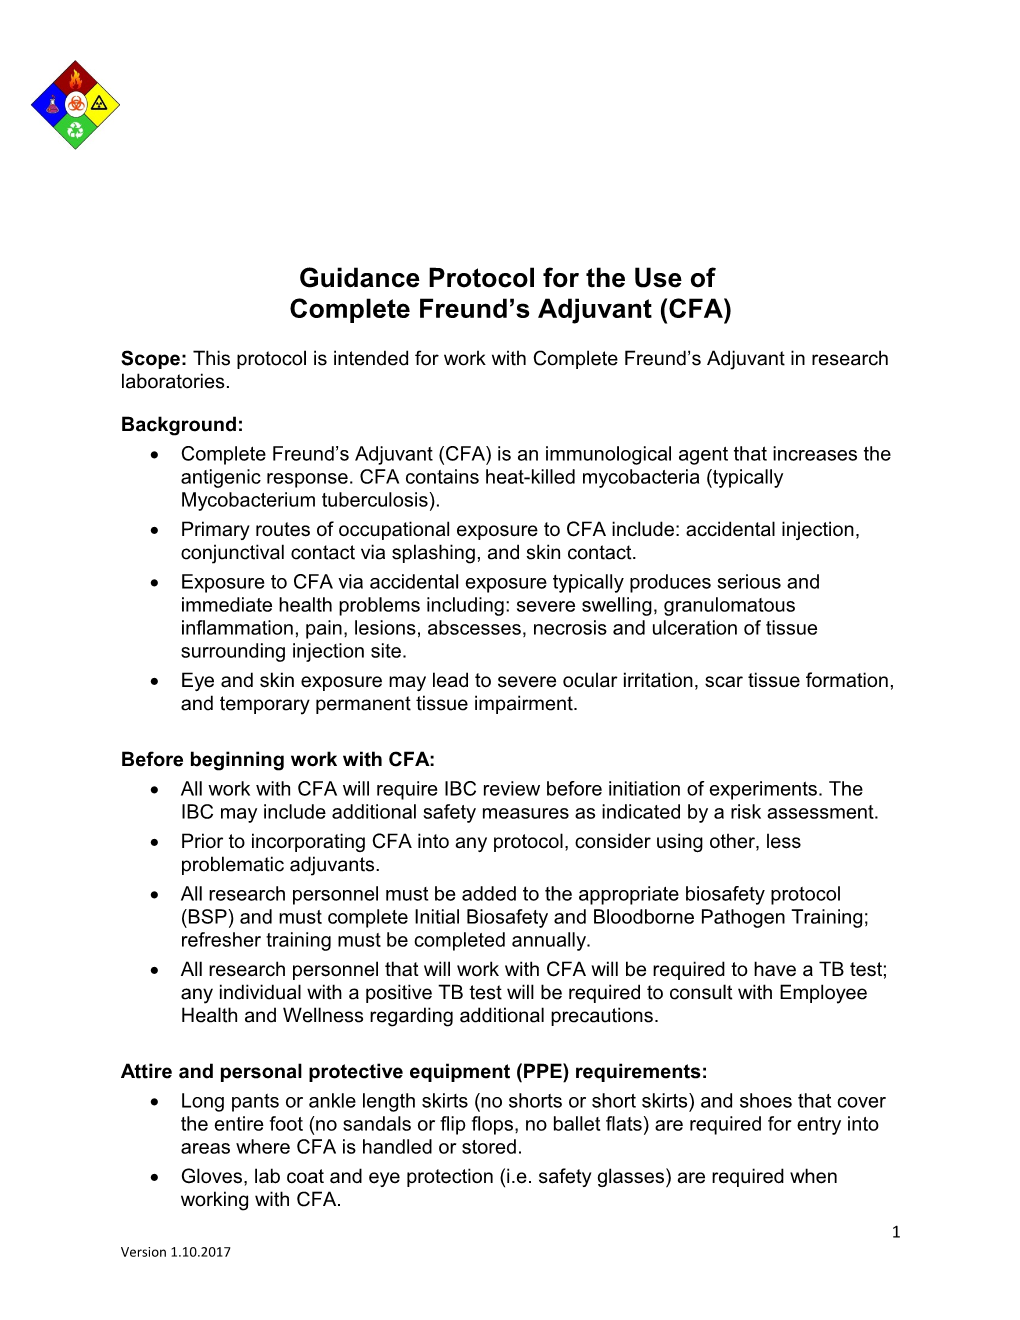 Guidance Protocol for the Use Of